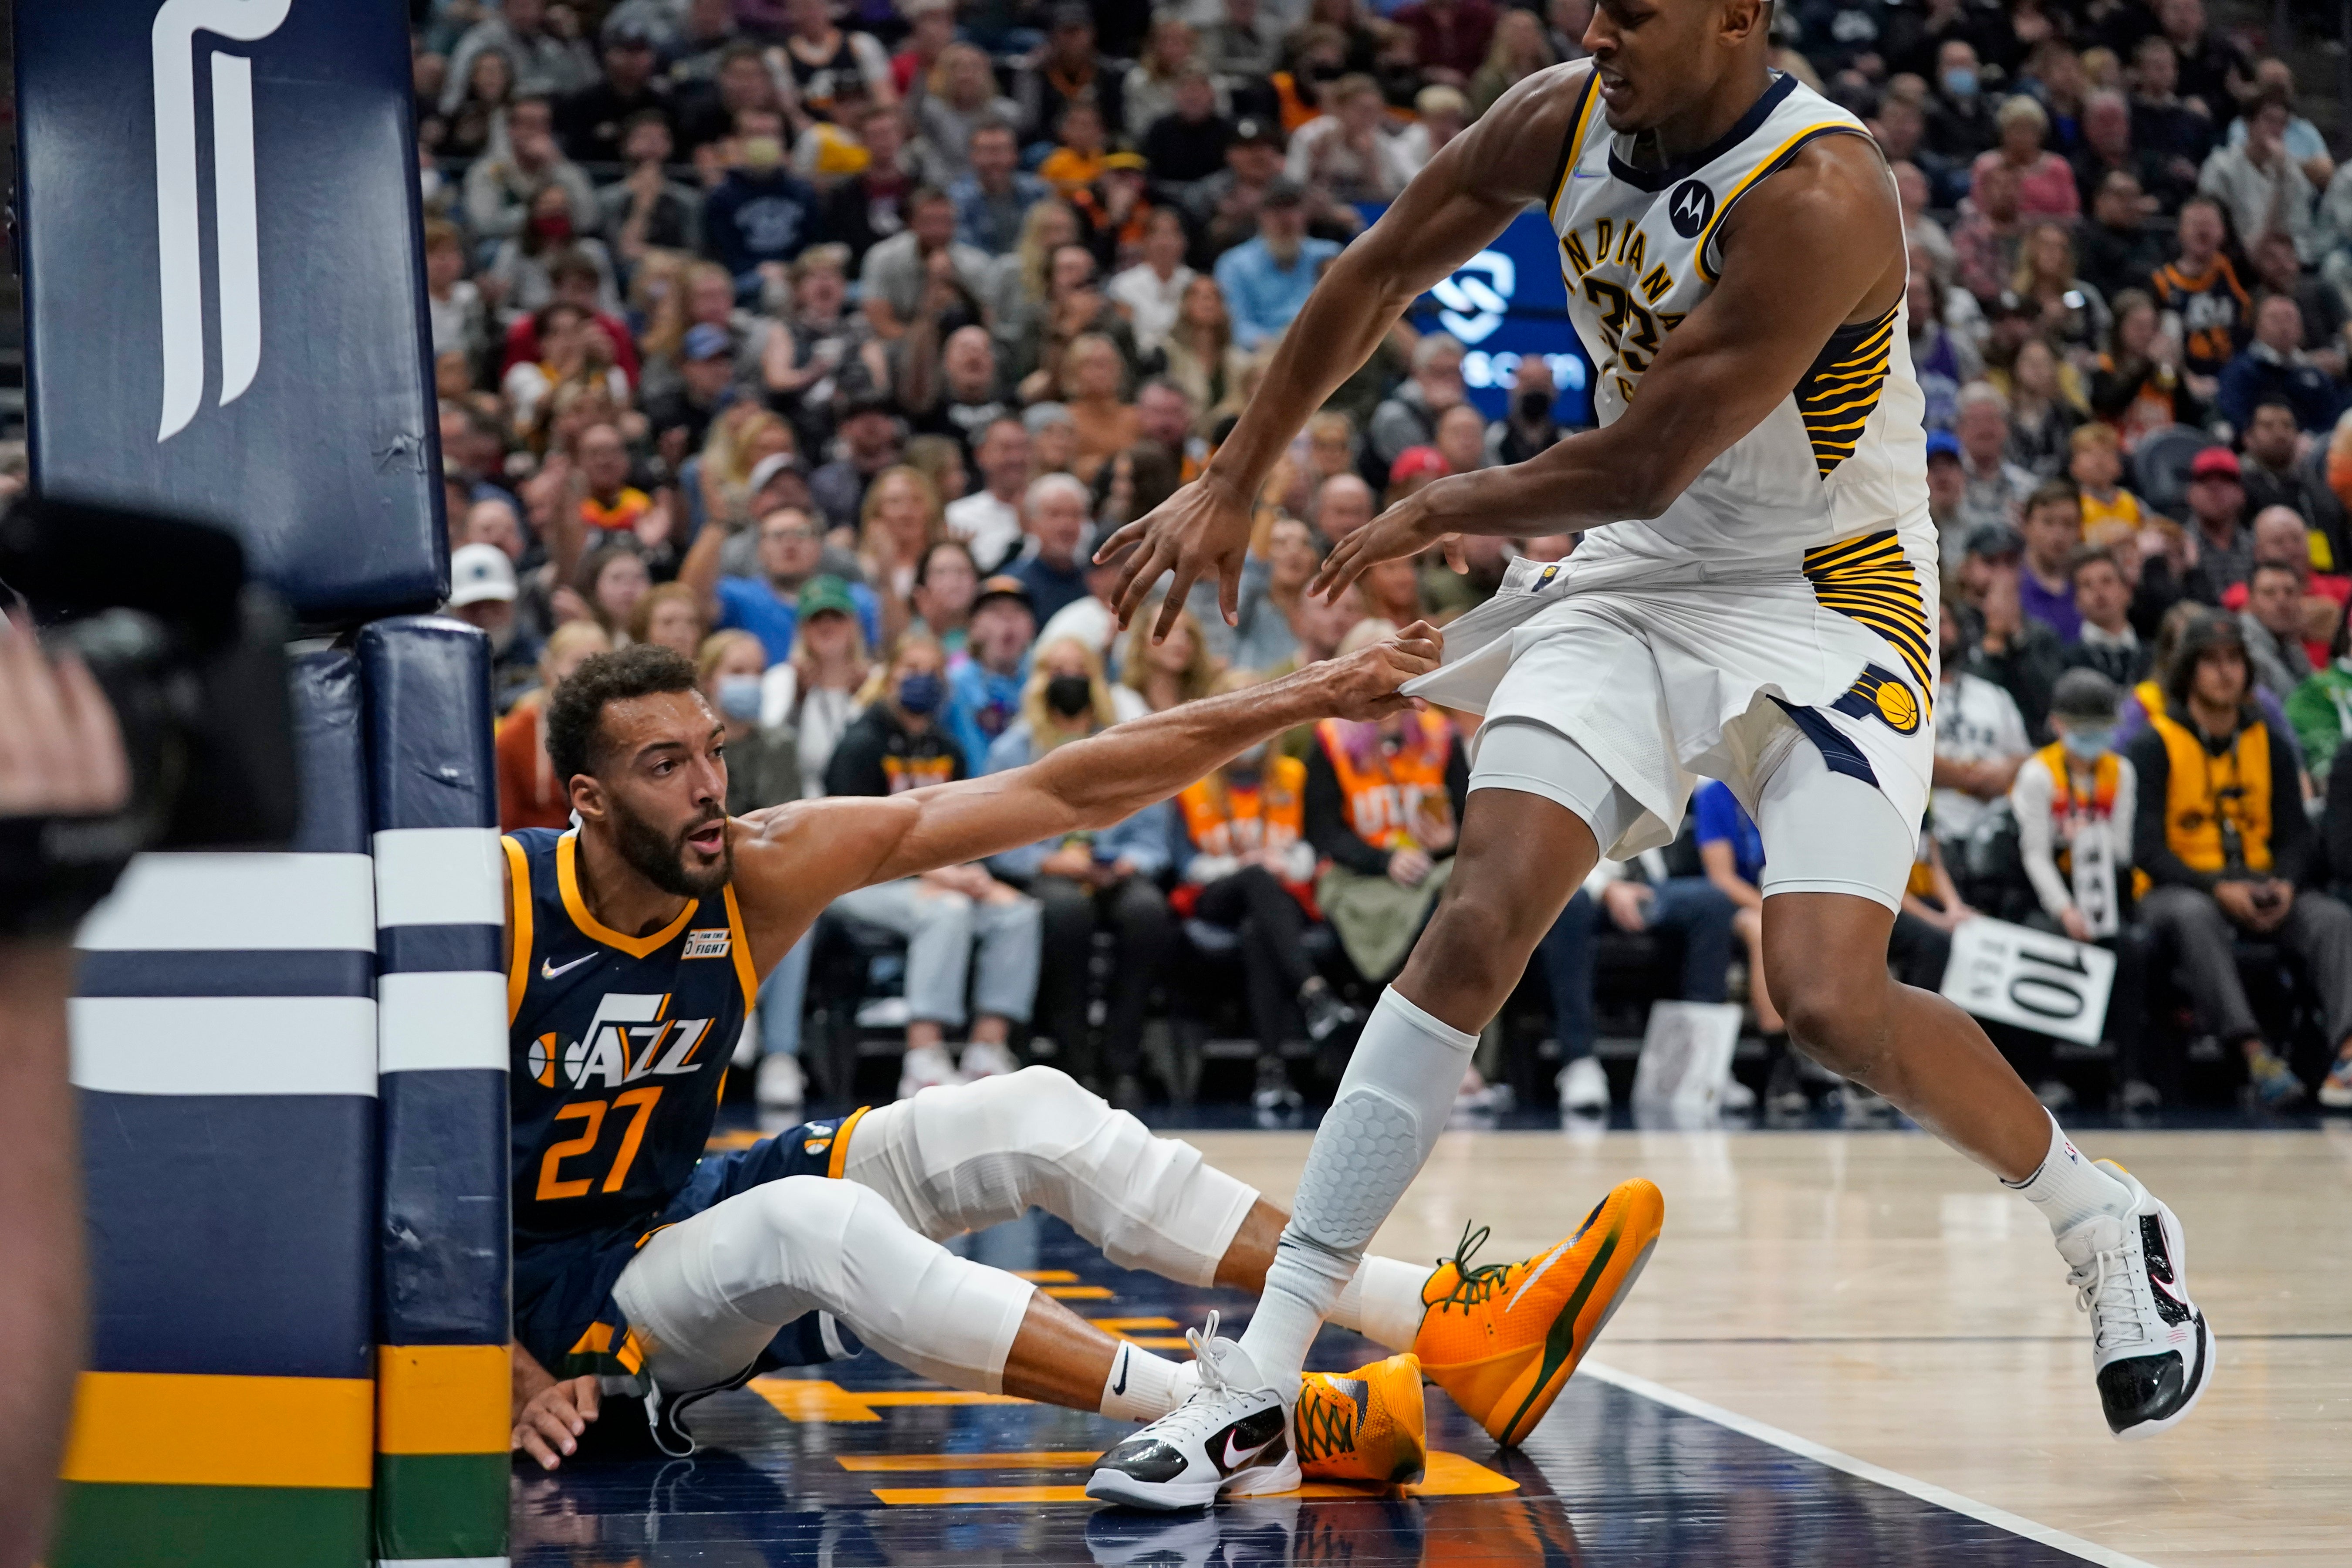 PACERS-JAZZ